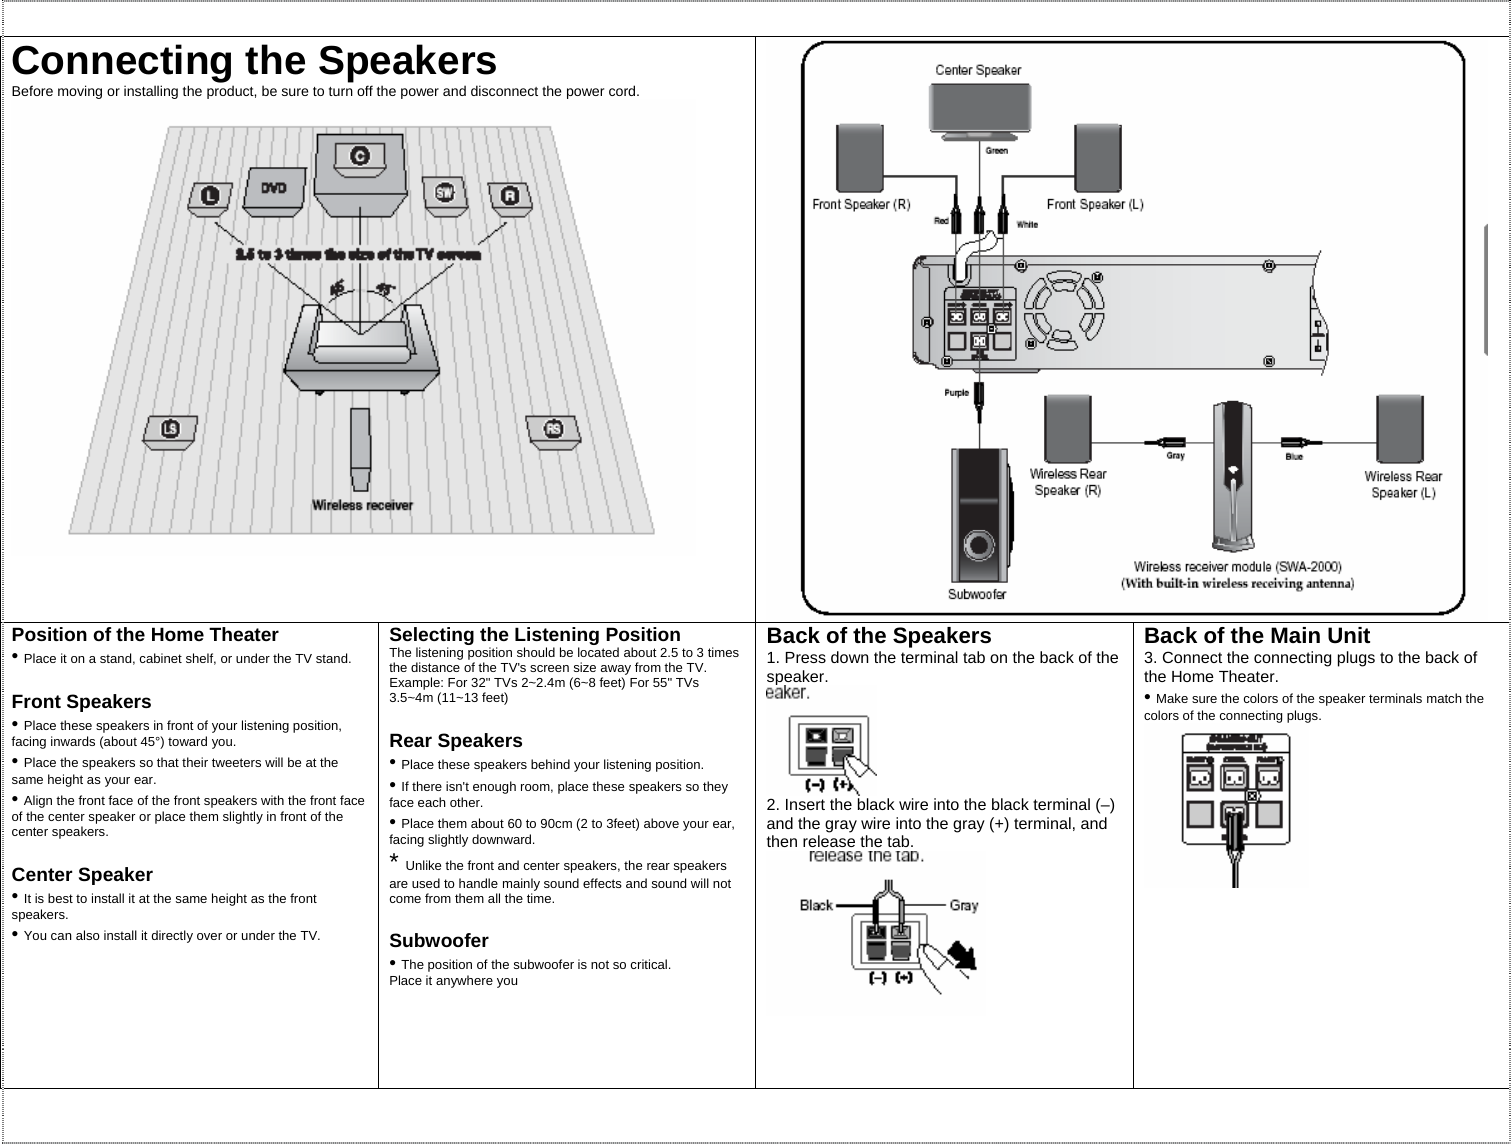  Connecting the Speakers Before moving or installing the product, be sure to turn off the power and disconnect the power cord.   Position of the Home Theater • Place it on a stand, cabinet shelf, or under the TV stand.  Front Speakers • Place these speakers in front of your listening position, facing inwards (about 45°) toward you. • Place the speakers so that their tweeters will be at the same height as your ear. • Align the front face of the front speakers with the front face of the center speaker or place them slightly in front of the center speakers.  Center Speaker • It is best to install it at the same height as the front speakers. • You can also install it directly over or under the TV.   Selecting the Listening Position The listening position should be located about 2.5 to 3 times the distance of the TV&apos;s screen size away from the TV. Example: For 32&quot; TVs 2~2.4m (6~8 feet) For 55&quot; TVs 3.5~4m (11~13 feet)  Rear Speakers • Place these speakers behind your listening position. • If there isn&apos;t enough room, place these speakers so they face each other. • Place them about 60 to 90cm (2 to 3feet) above your ear, facing slightly downward. * Unlike the front and center speakers, the rear speakers are used to handle mainly sound effects and sound will not come from them all the time.  Subwoofer • The position of the subwoofer is not so critical. Place it anywhere you Back of the Speakers 1. Press down the terminal tab on the back of the speaker.  2. Insert the black wire into the black terminal (–) and the gray wire into the gray (+) terminal, and then release the tab.     Back of the Main Unit 3. Connect the connecting plugs to the back of the Home Theater. • Make sure the colors of the speaker terminals match the colors of the connecting plugs.   